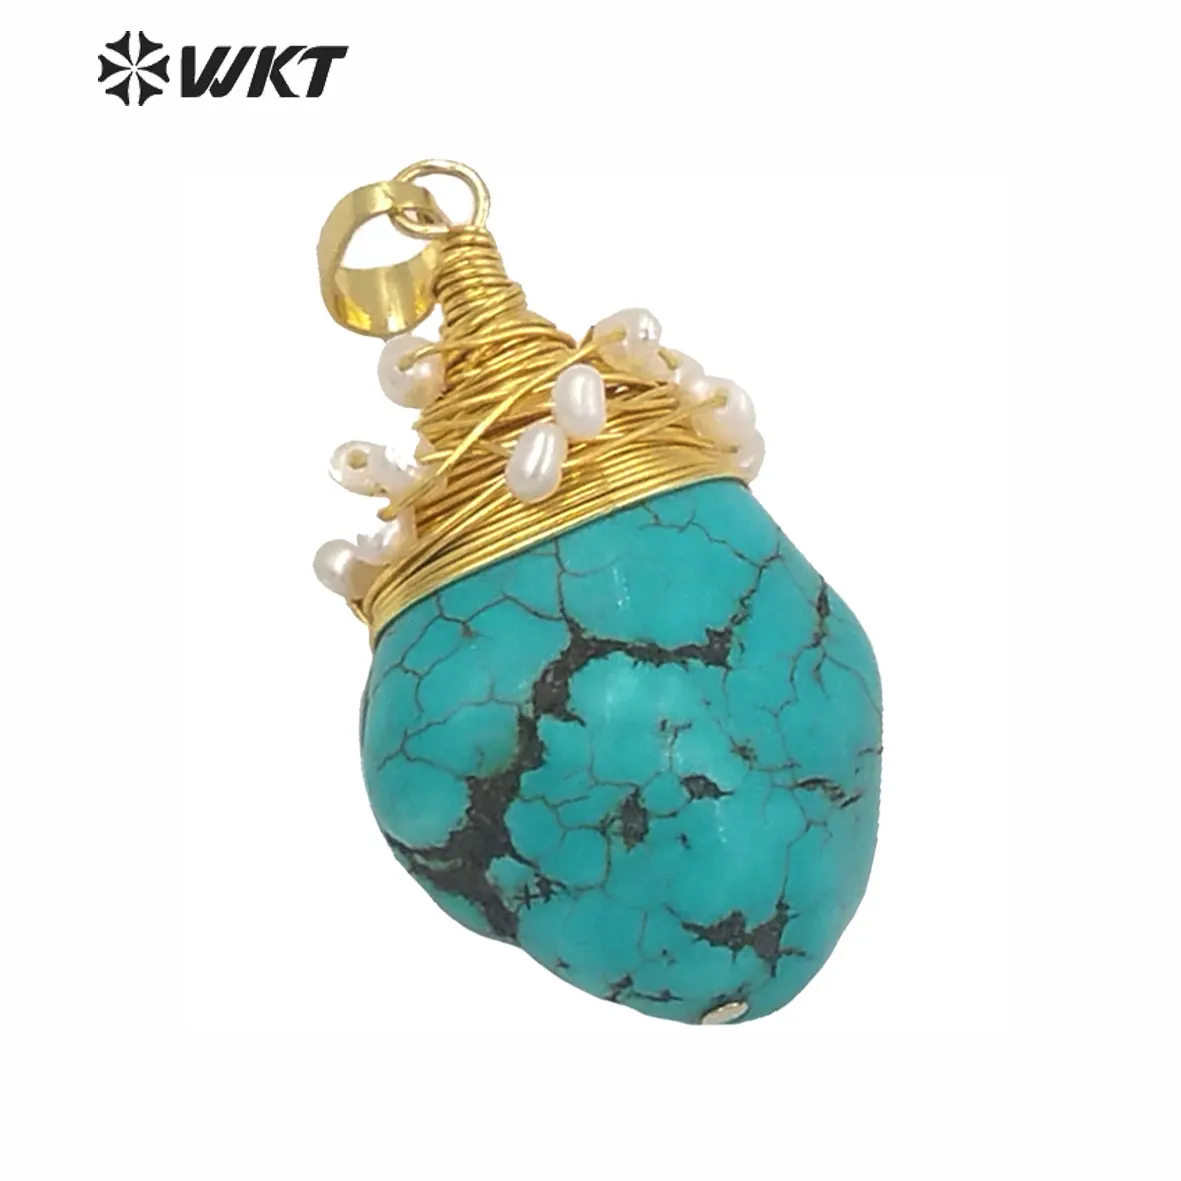 WT-P1444 Natural Stone Necklaces Pendant With Copper Wire Charm White beads embellishment Green pendant Turquoise Pendant